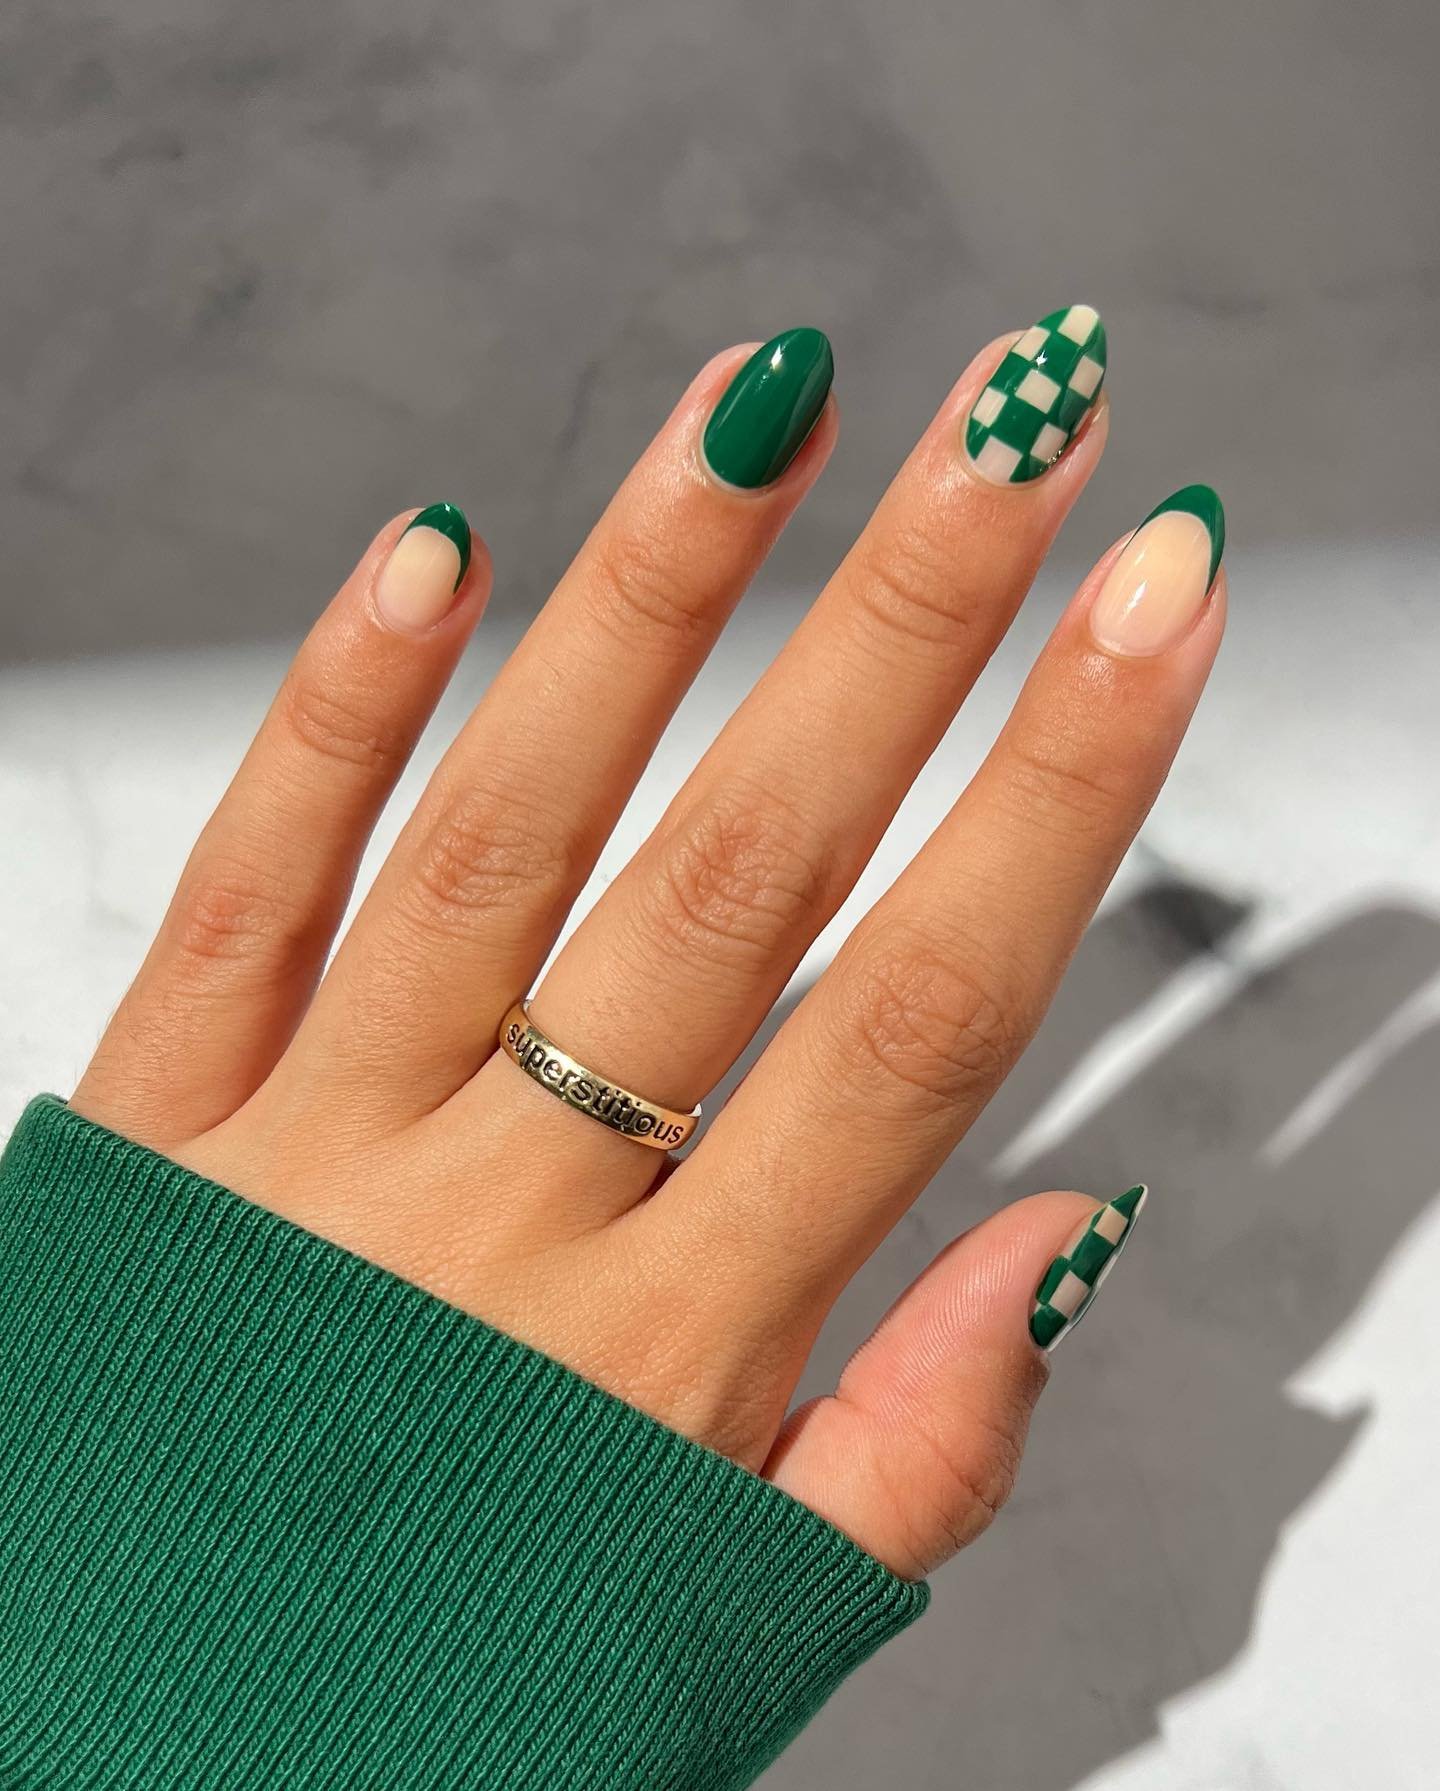 21 - Picture of Green Nails